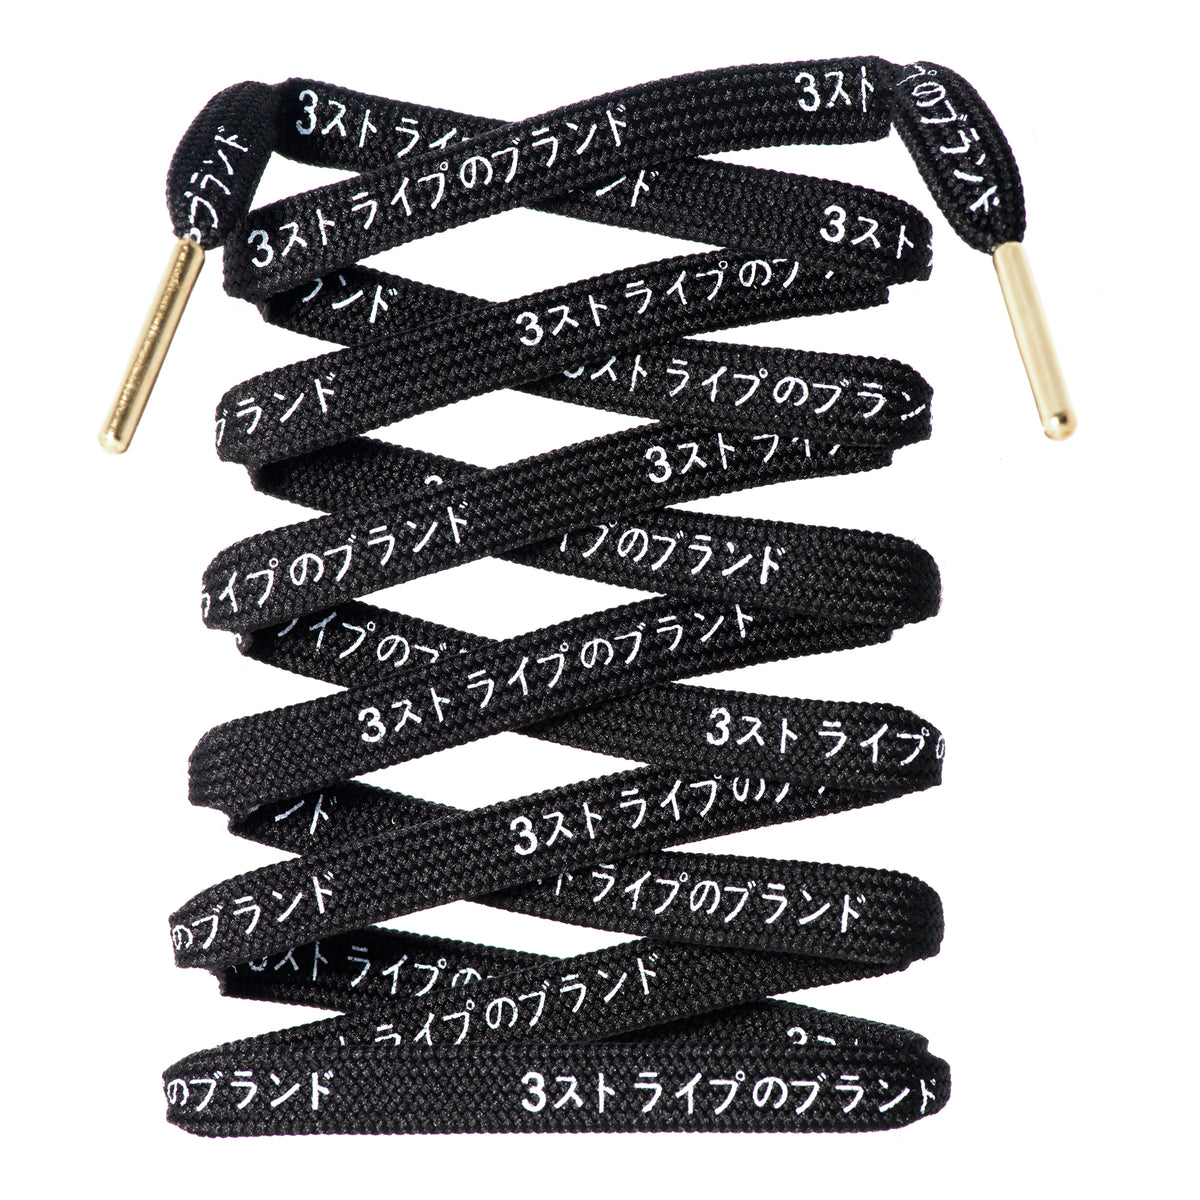 Best Deal for NBEADS 24 Sets Metal Shoelace Tips, 2 Colors Alloy Shoelace